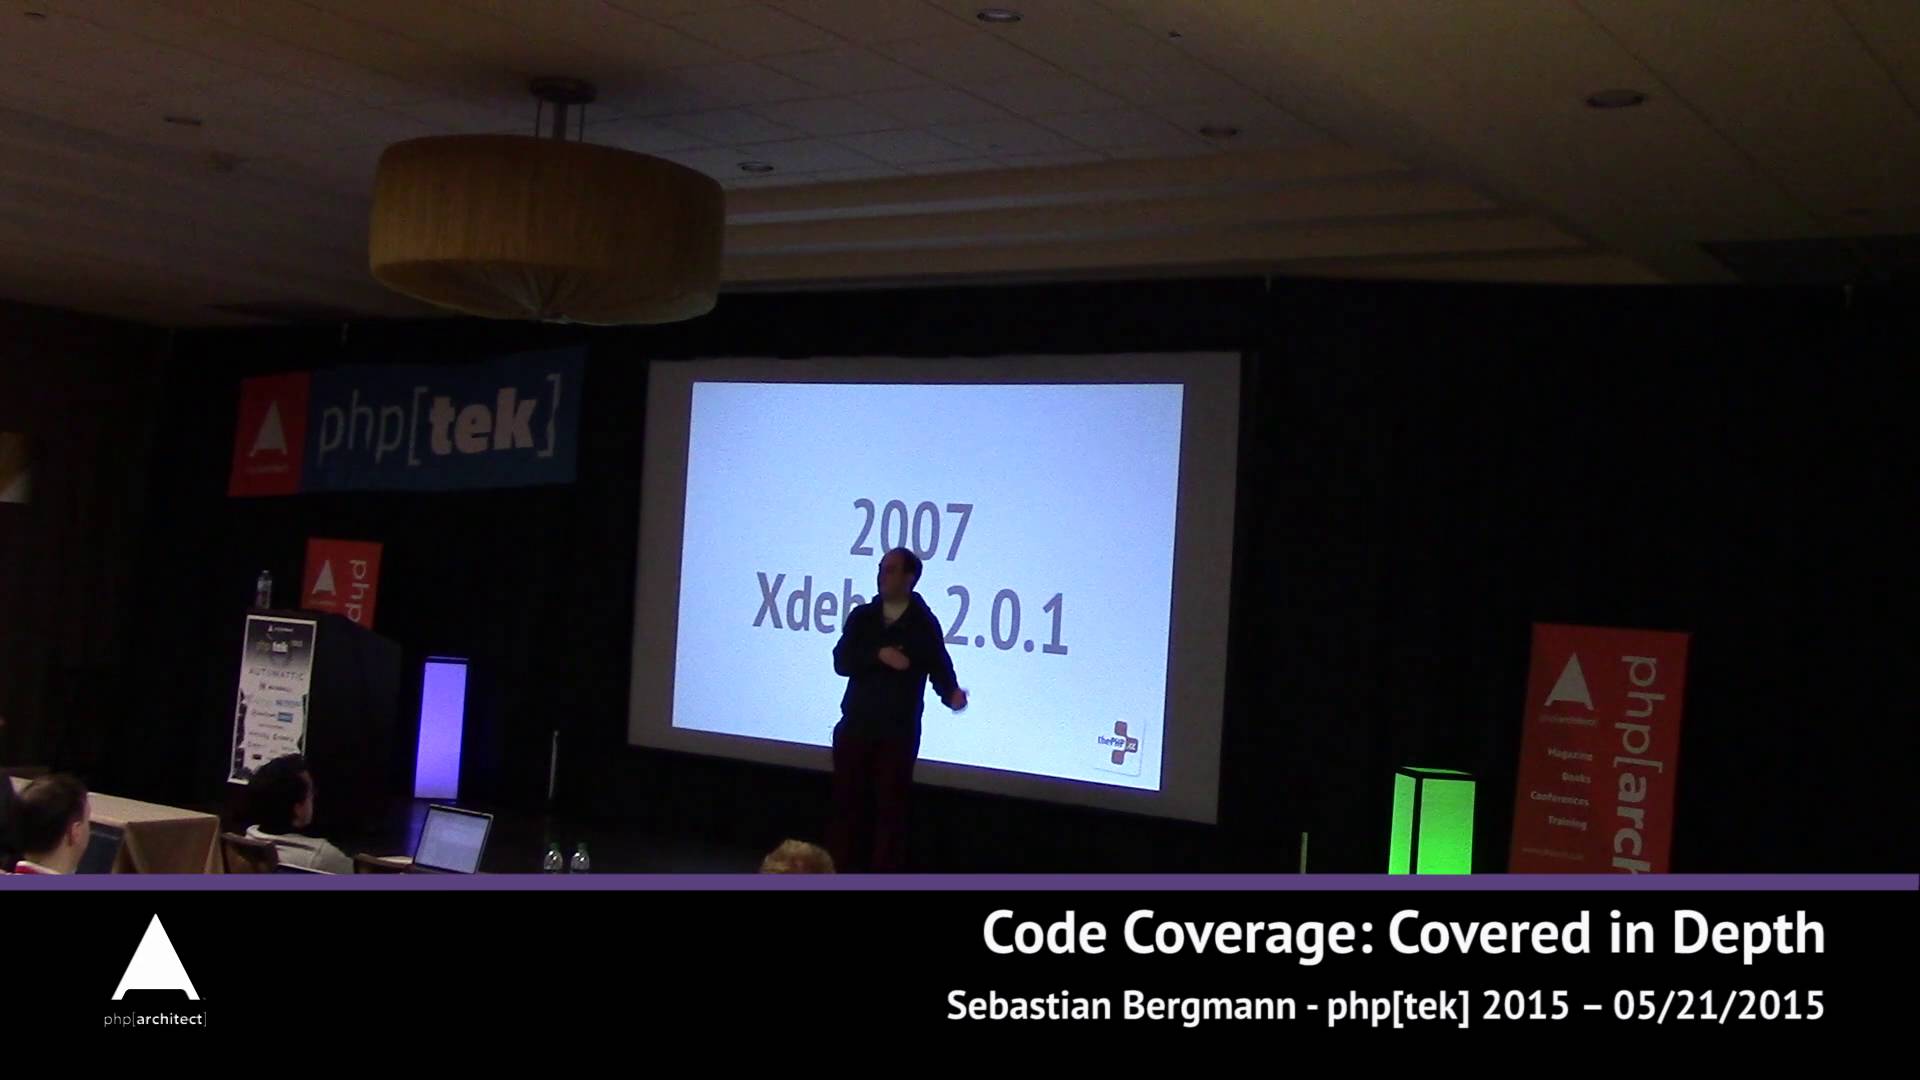 Code Coverage: Covered in Depth